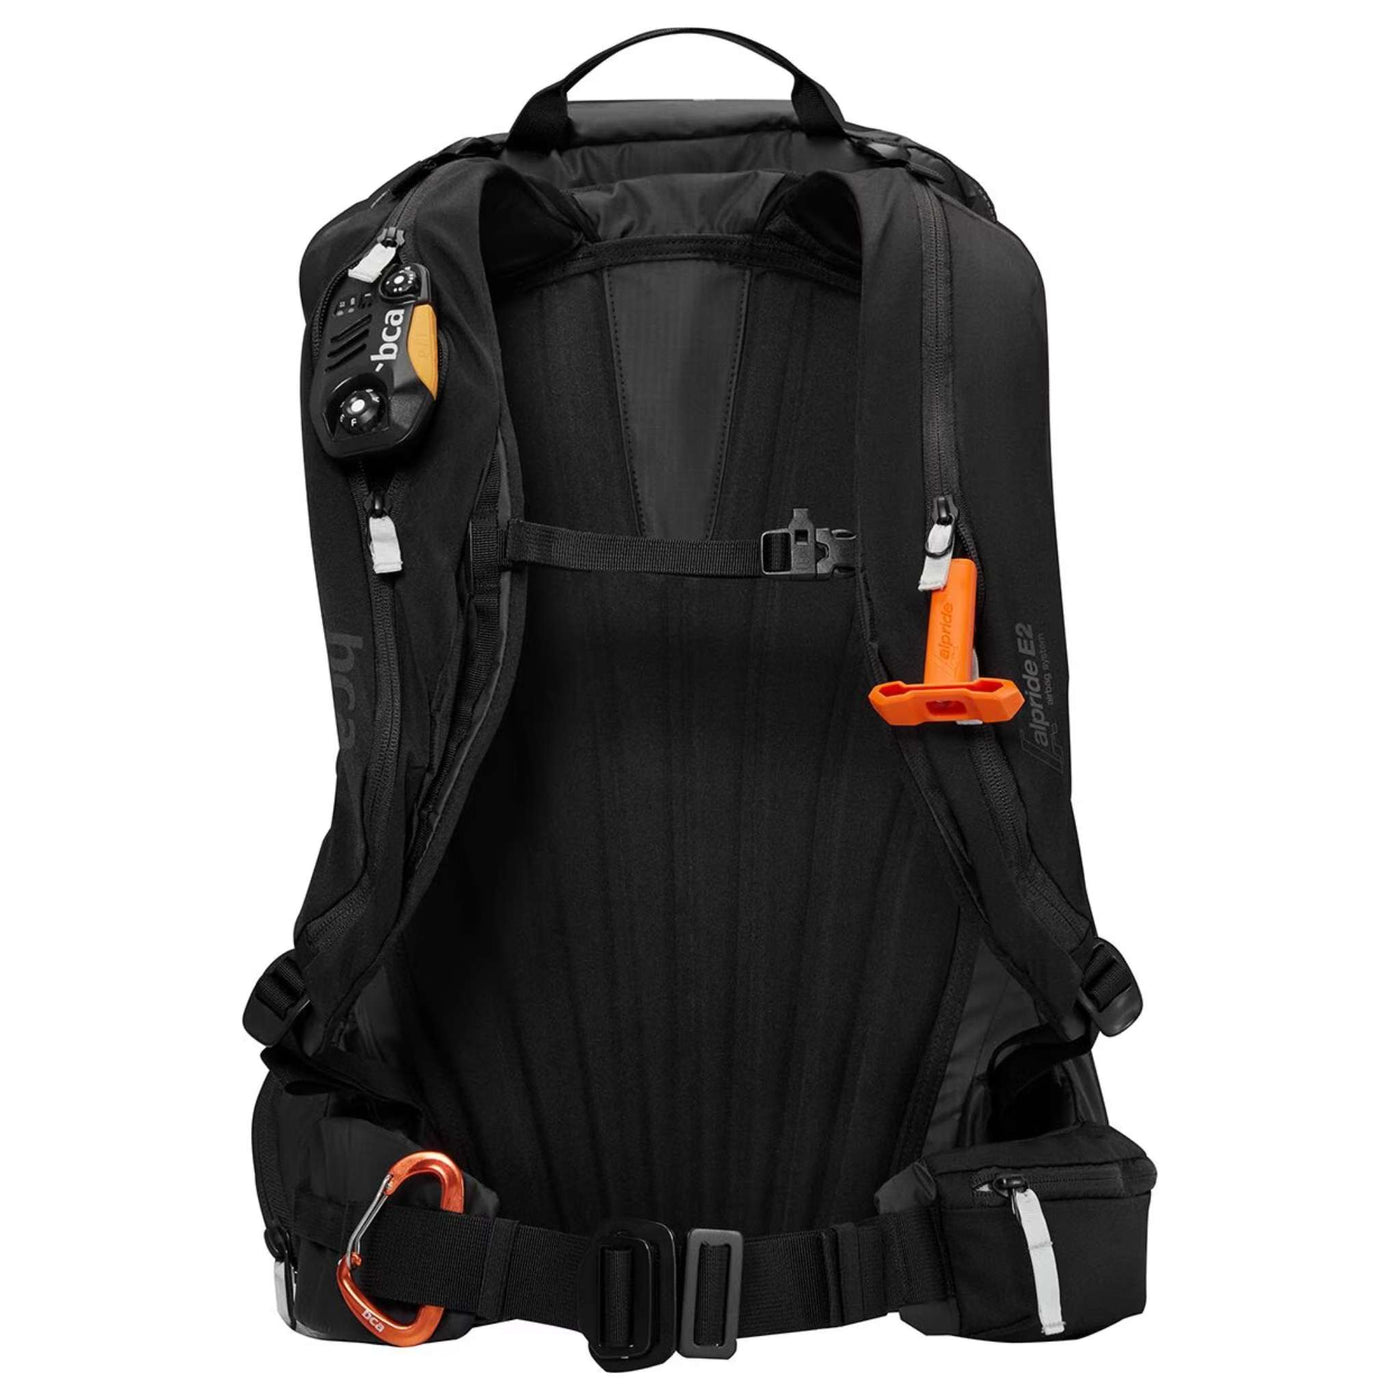 Backcountry Access Float E2 Avalanche Bag - 35L | Avalanche Airbag NZ | Further Faster Christchurch NZ #black